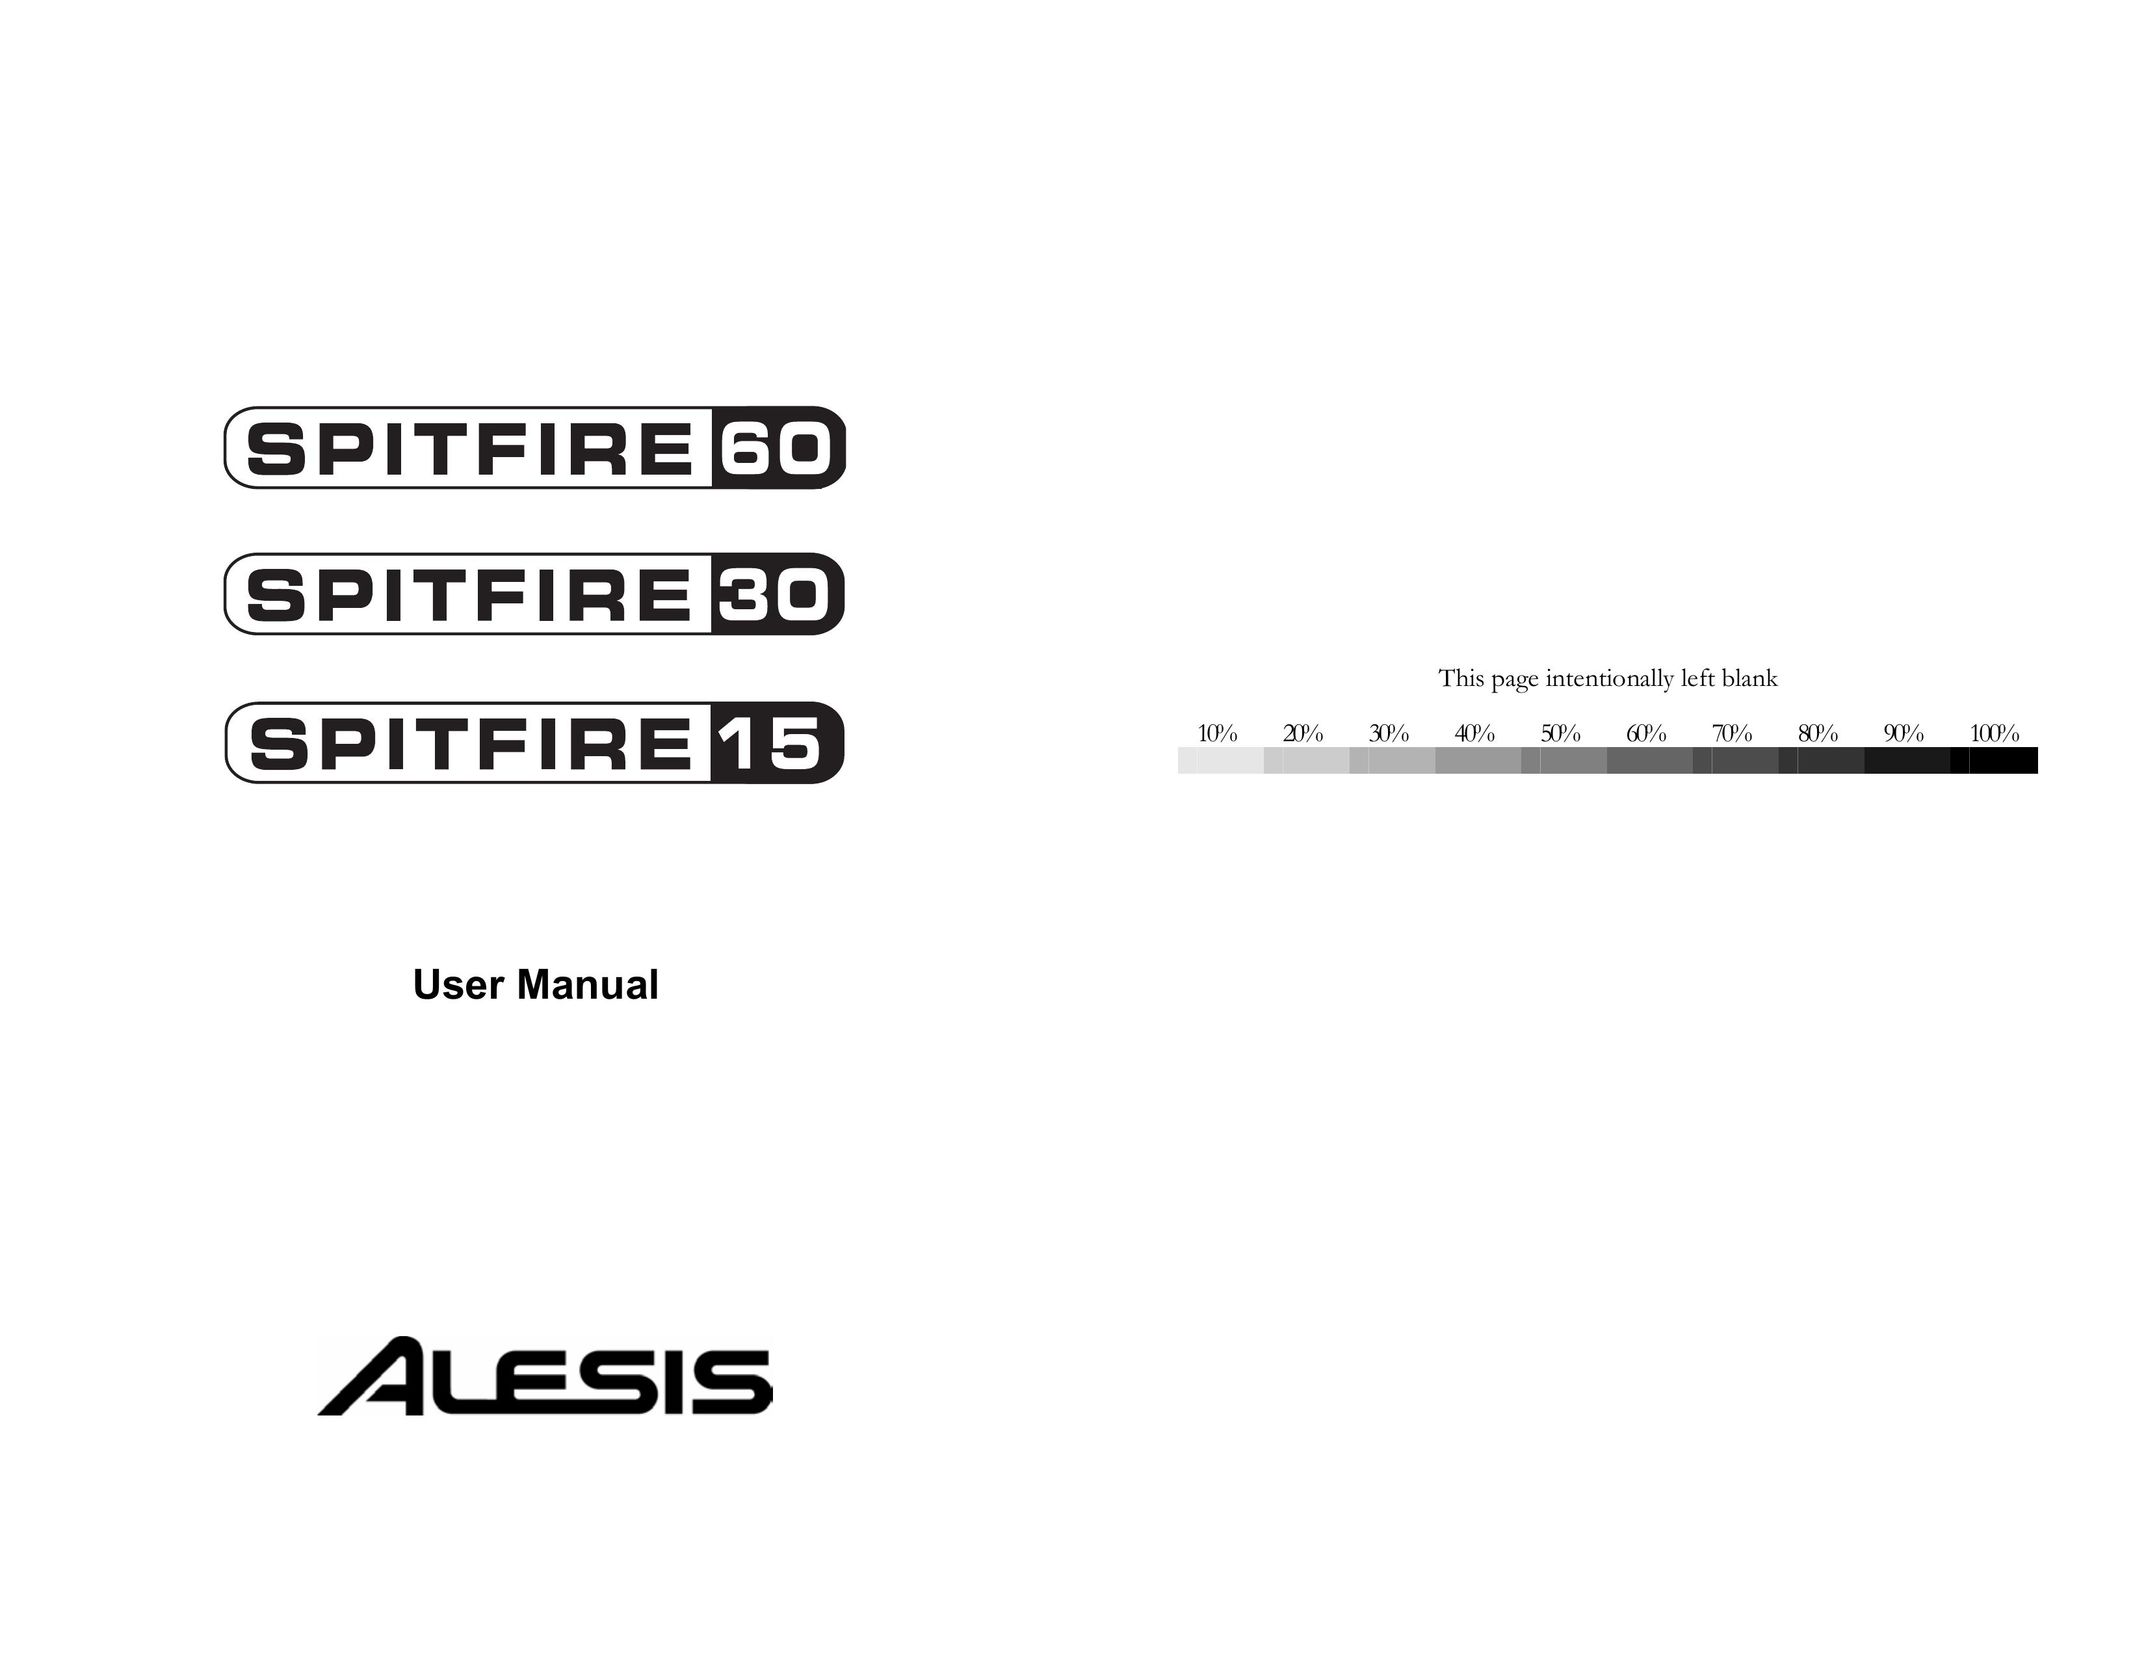 Alesis Spitfire 60 Stereo Amplifier User Manual